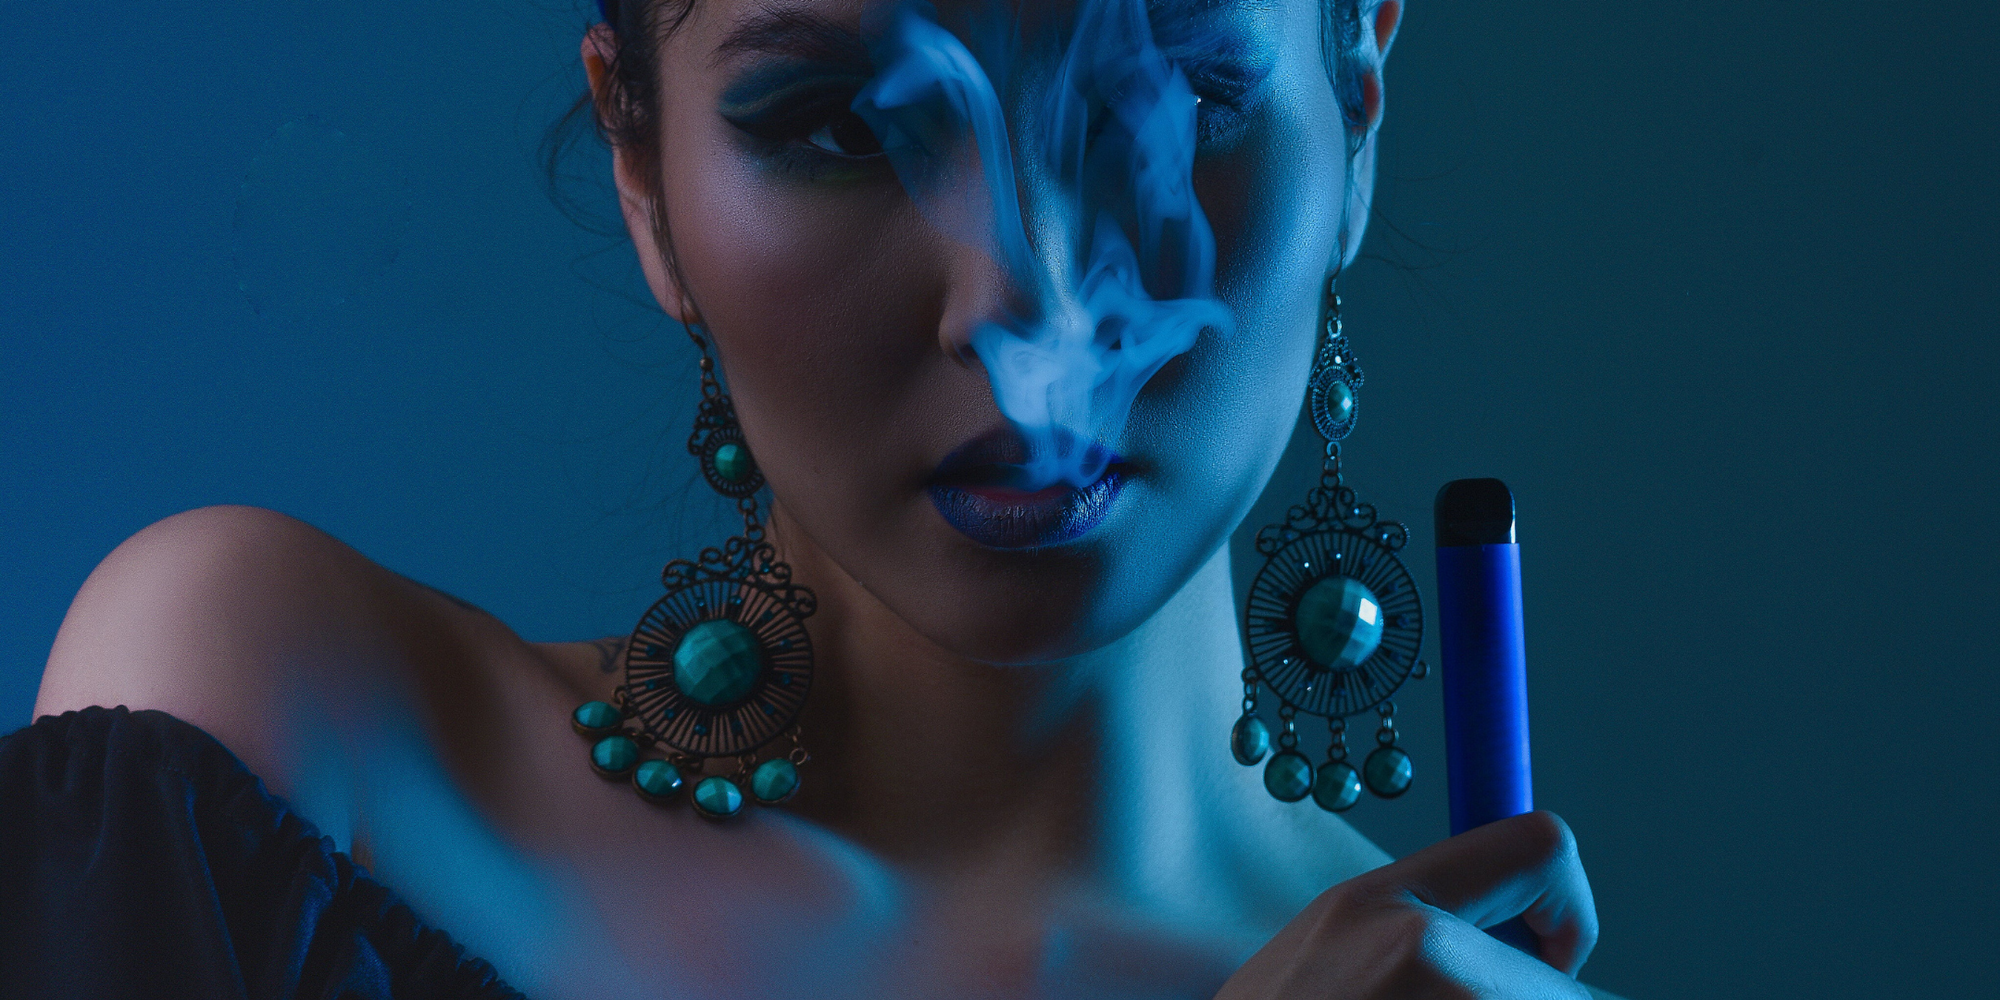 Woman holding an all in one disposable vape while exhaling smoke from her mouth with a blue hue lighting